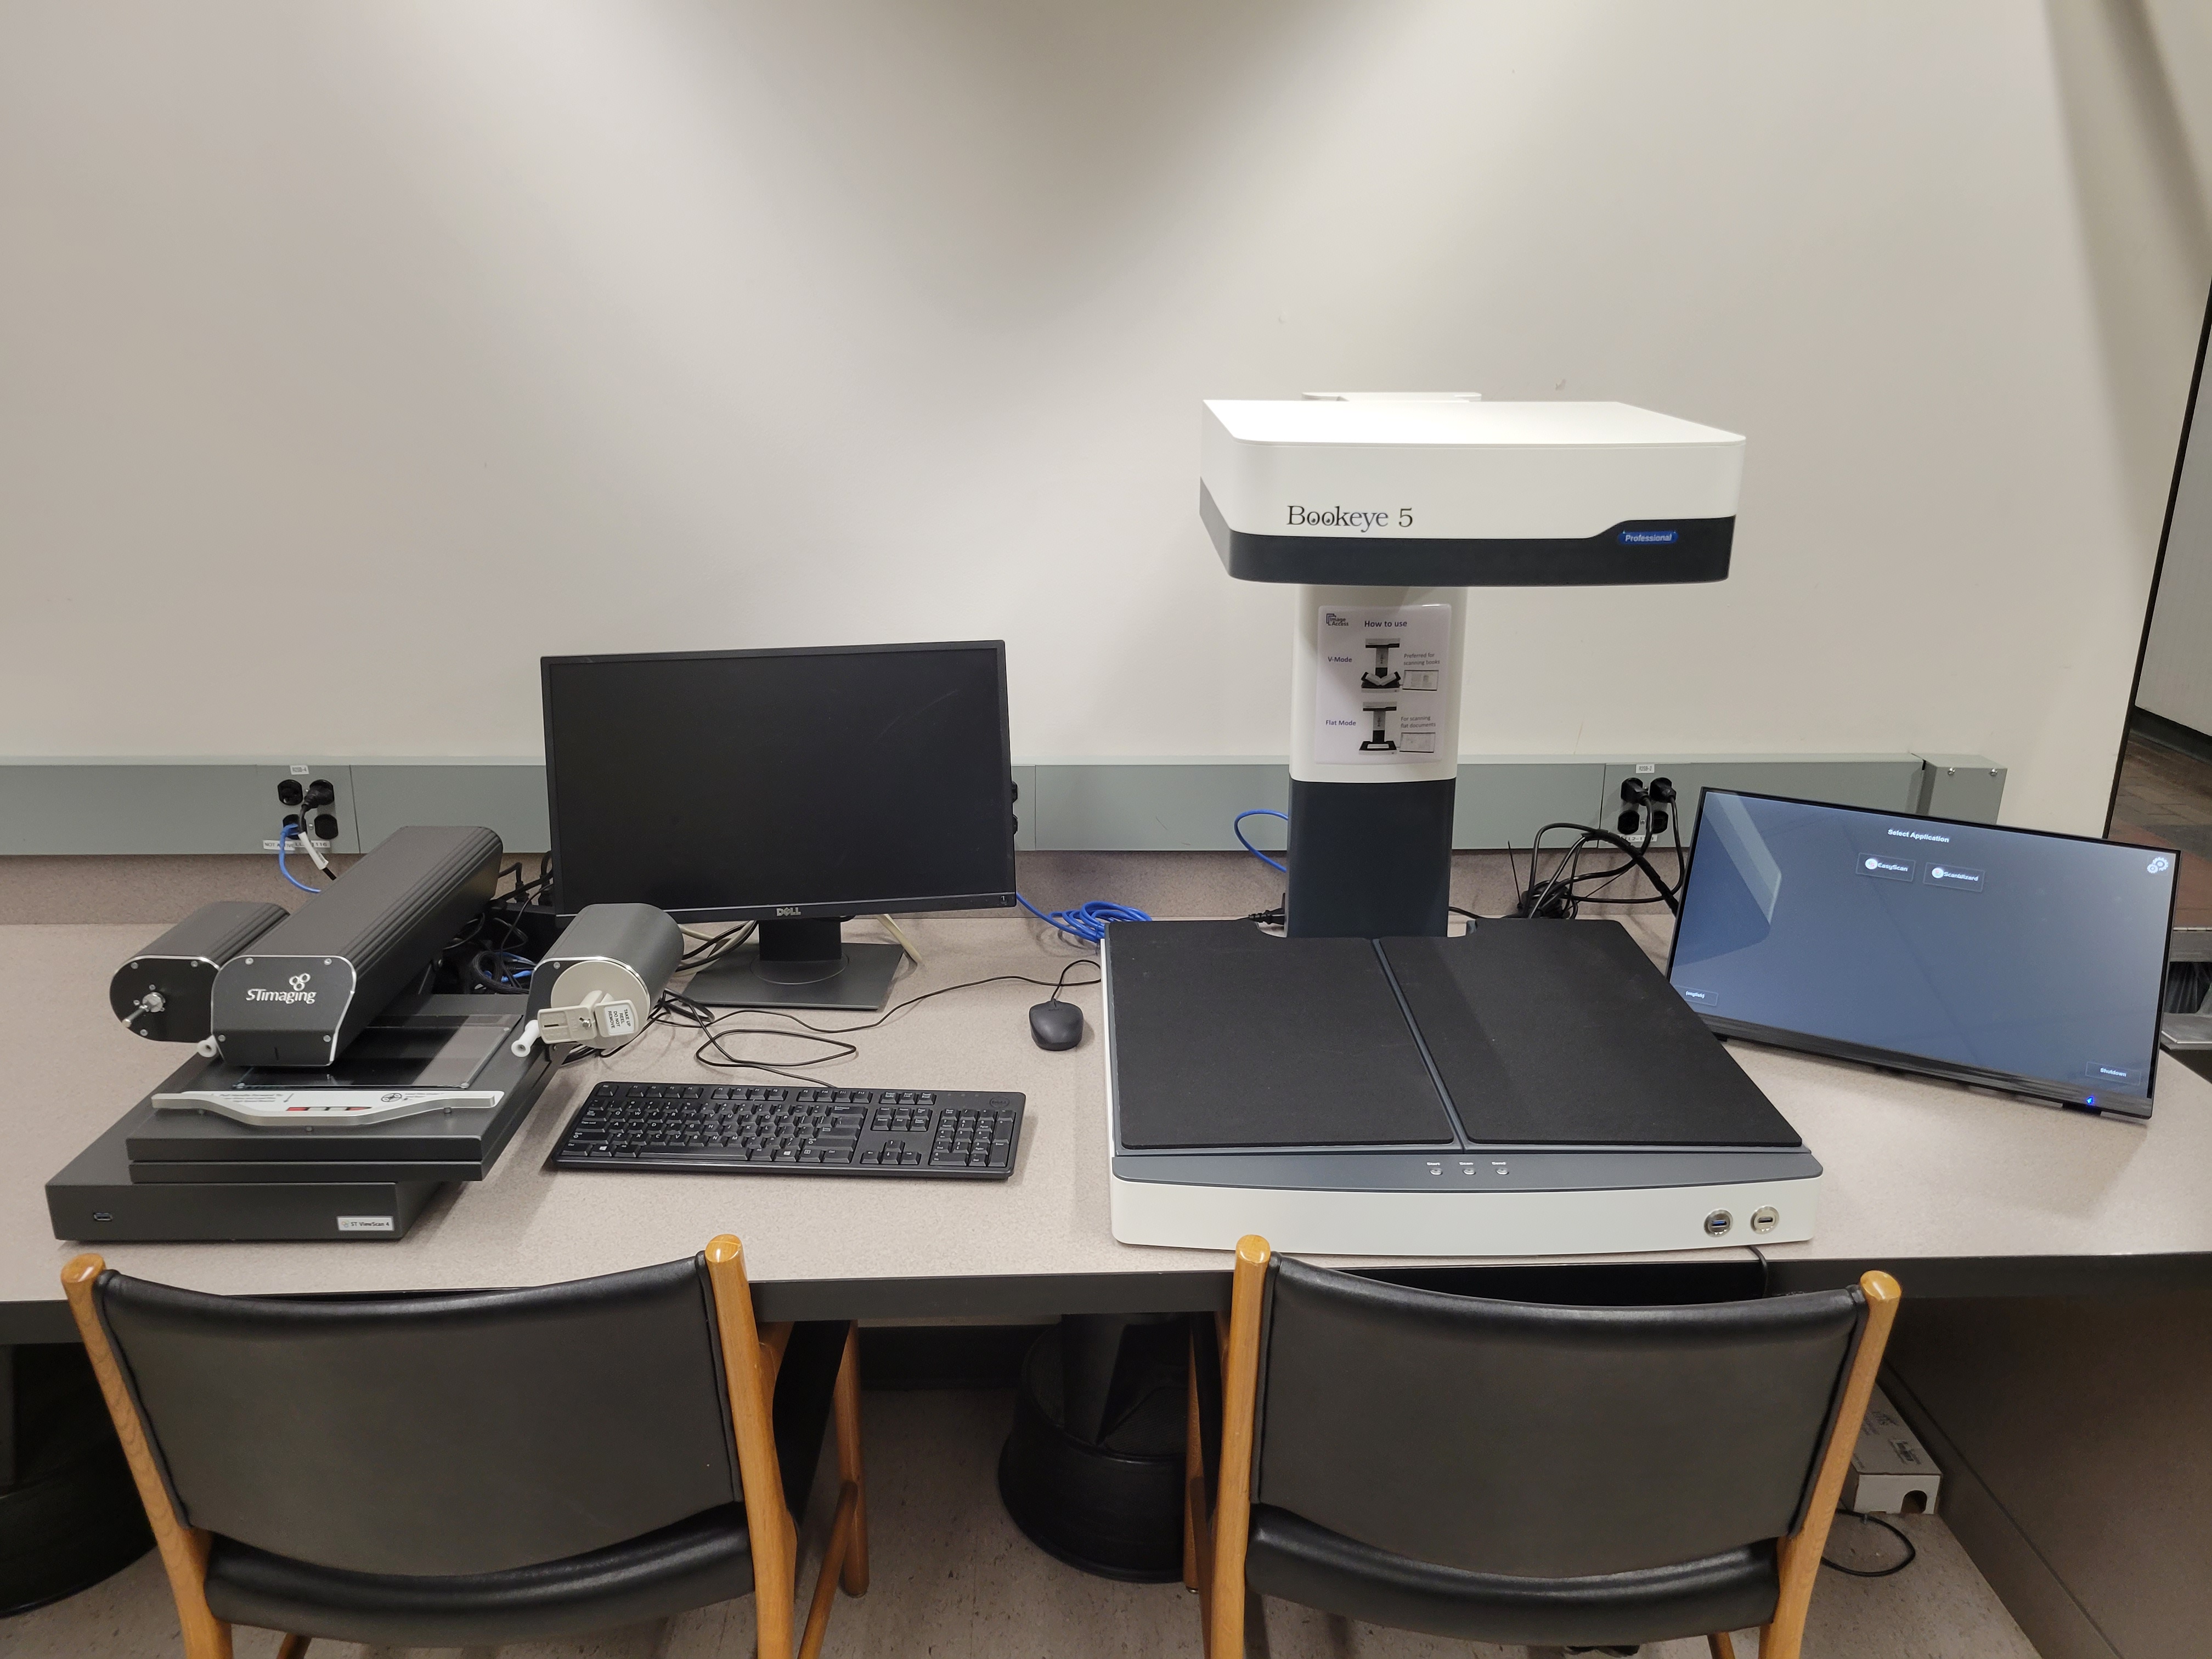 new technology equipment: a book eye scanner and a microfilm reader